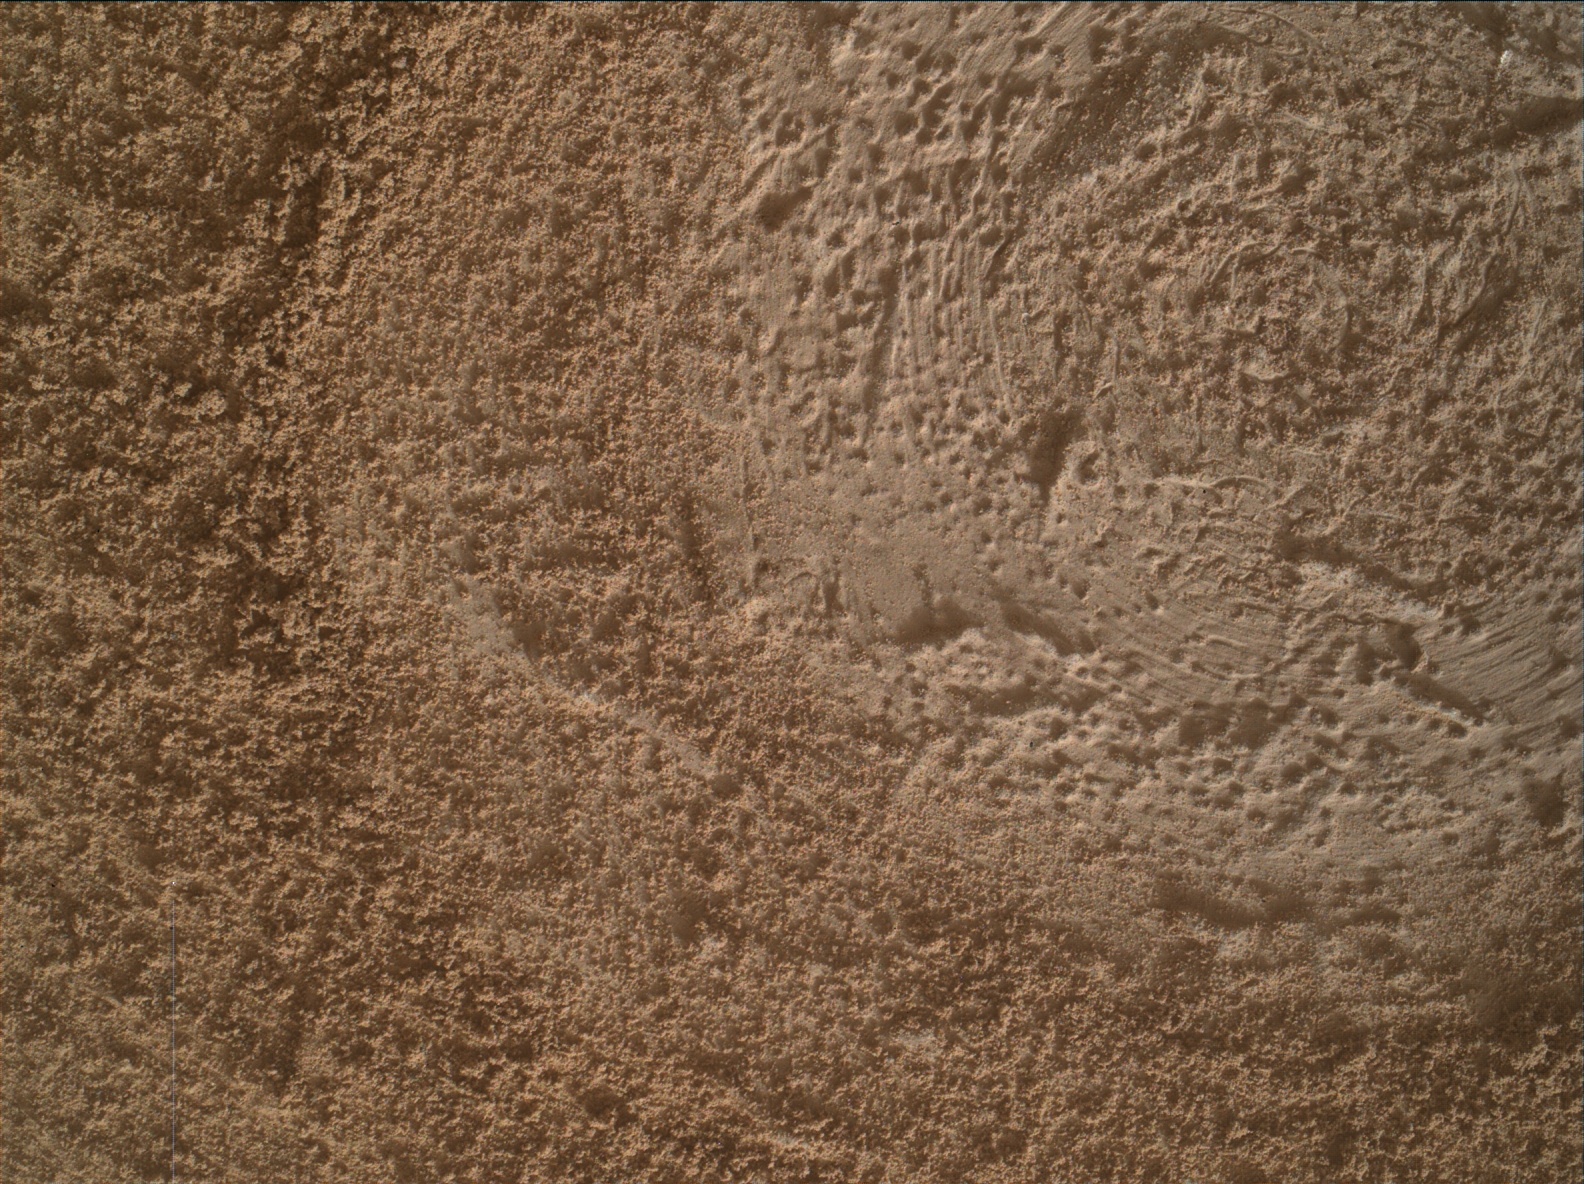 Nasa's Mars rover Curiosity acquired this image using its Mars Hand Lens Imager (MAHLI) on Sol 3386